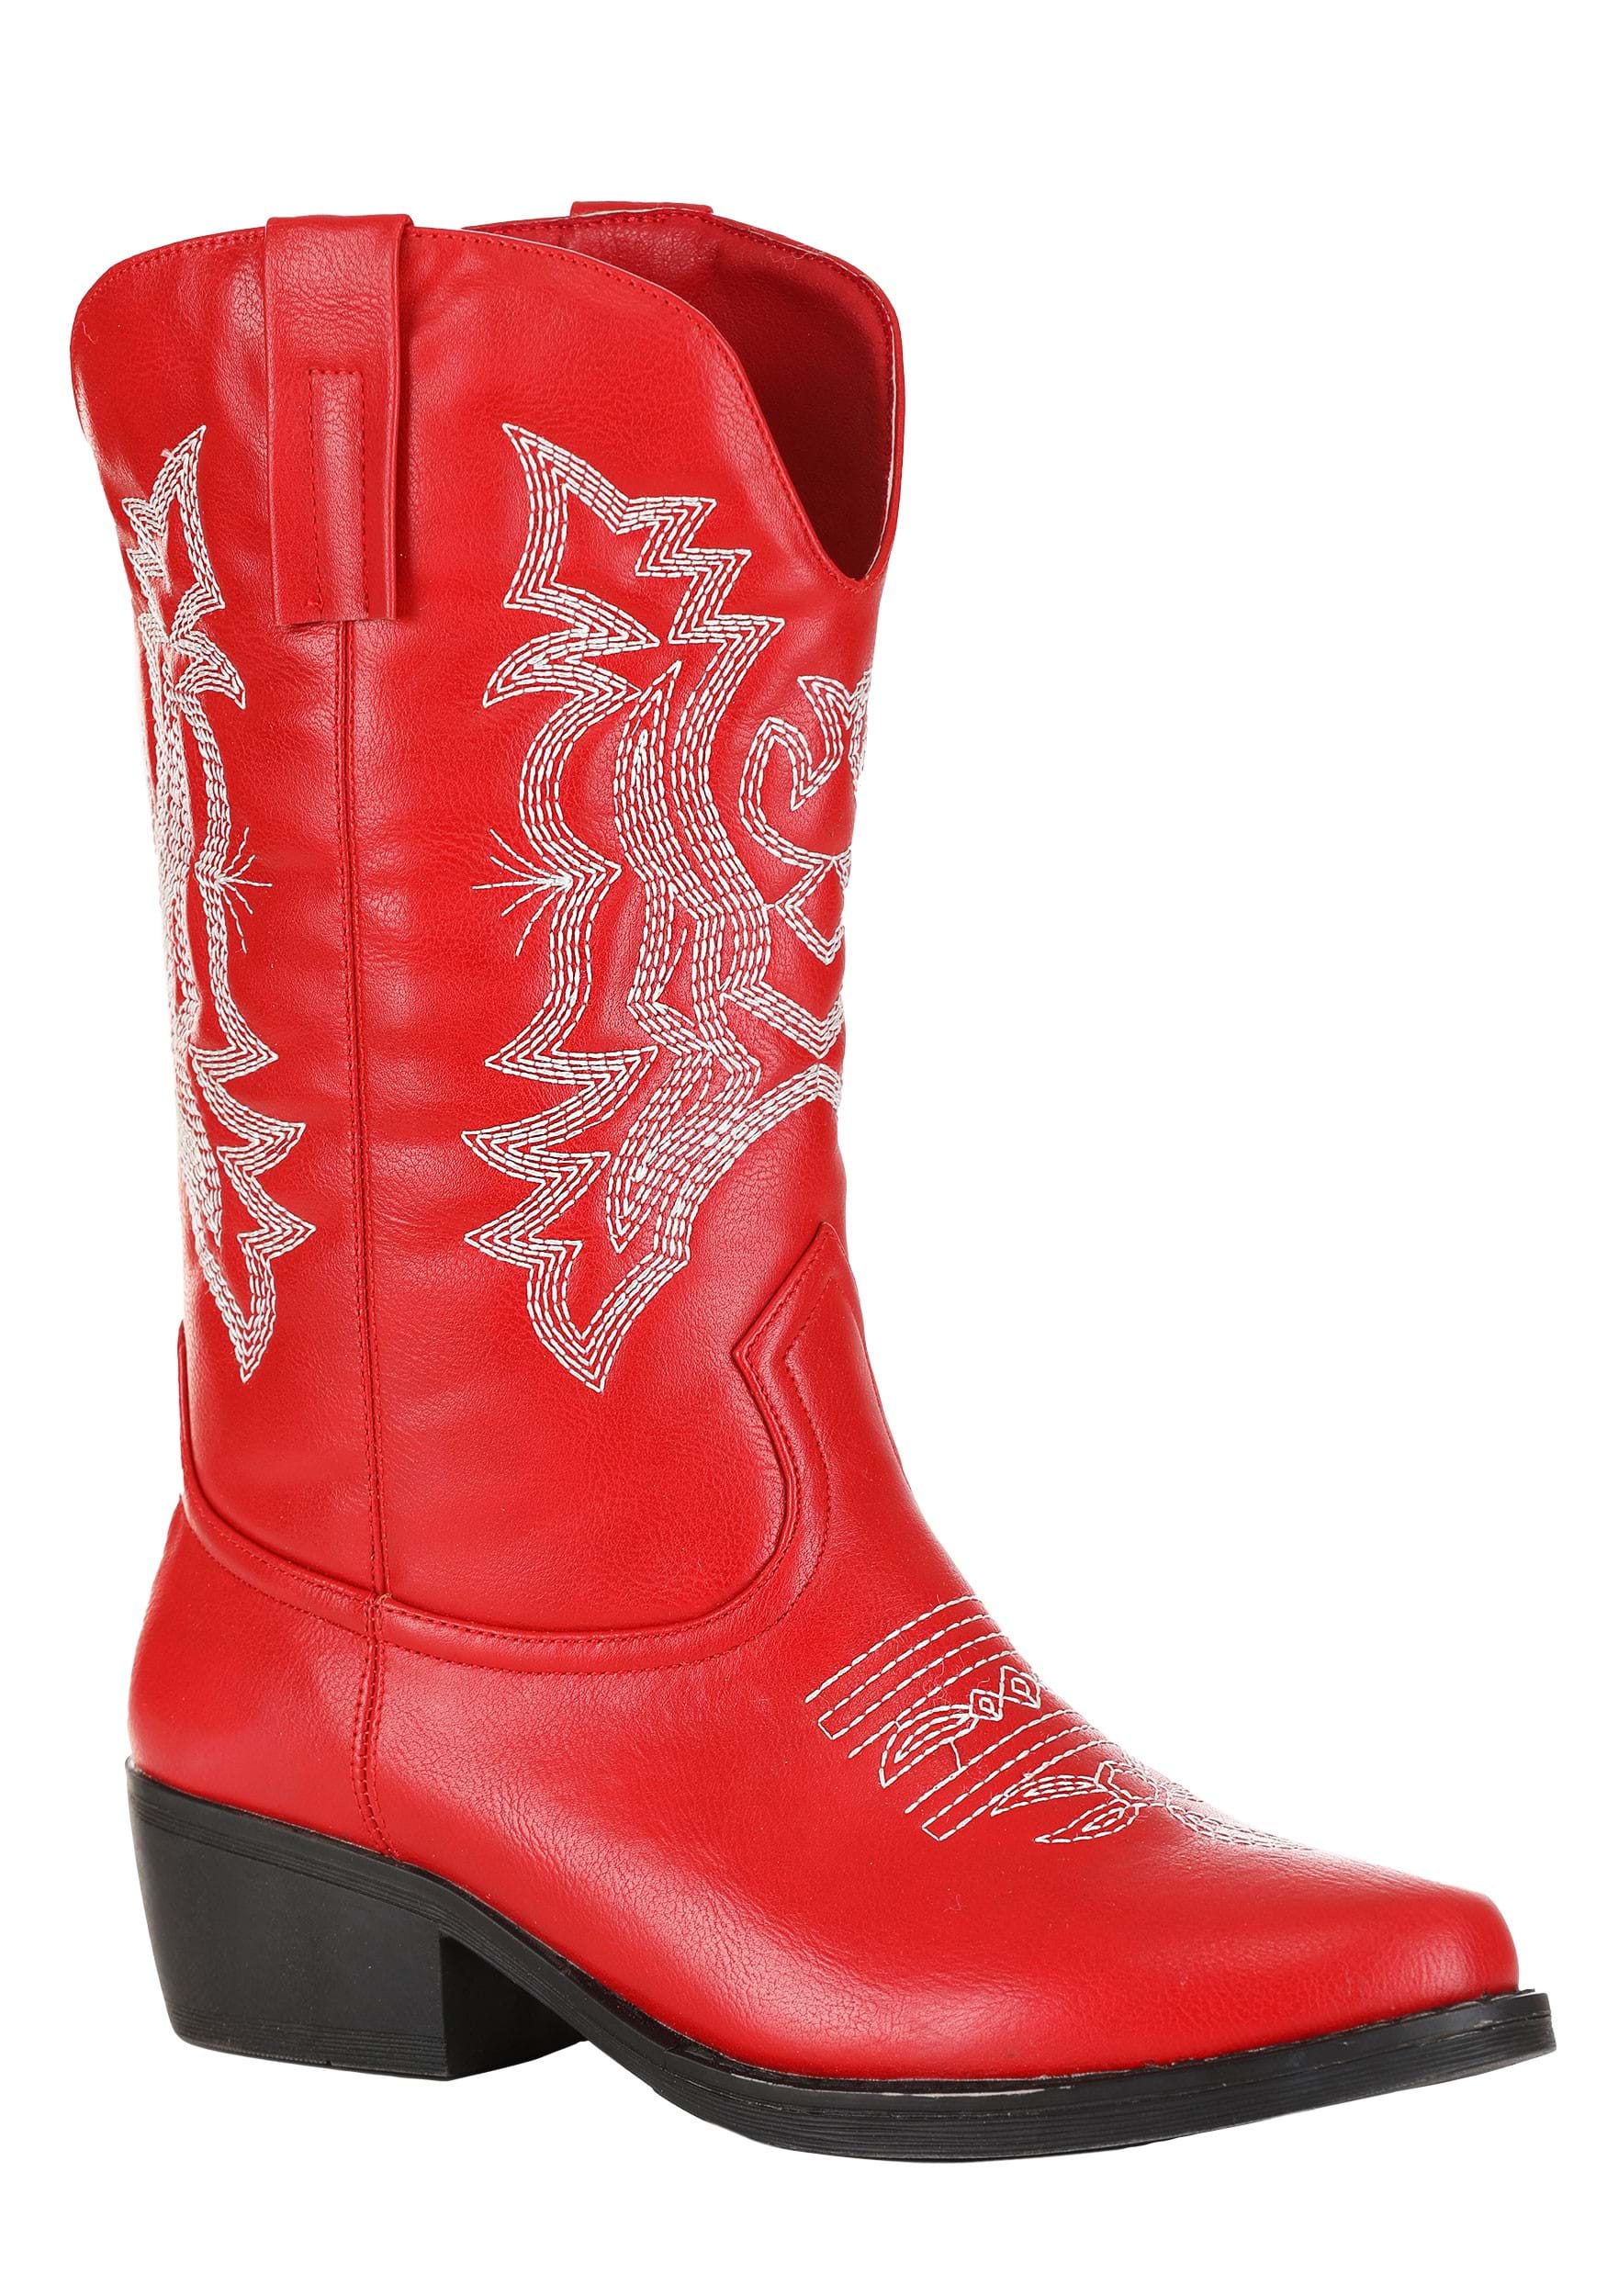 https://images.halloweencostumes.com/products/91964/1-1/womens-classic-red-cowgirl-boots.jpg